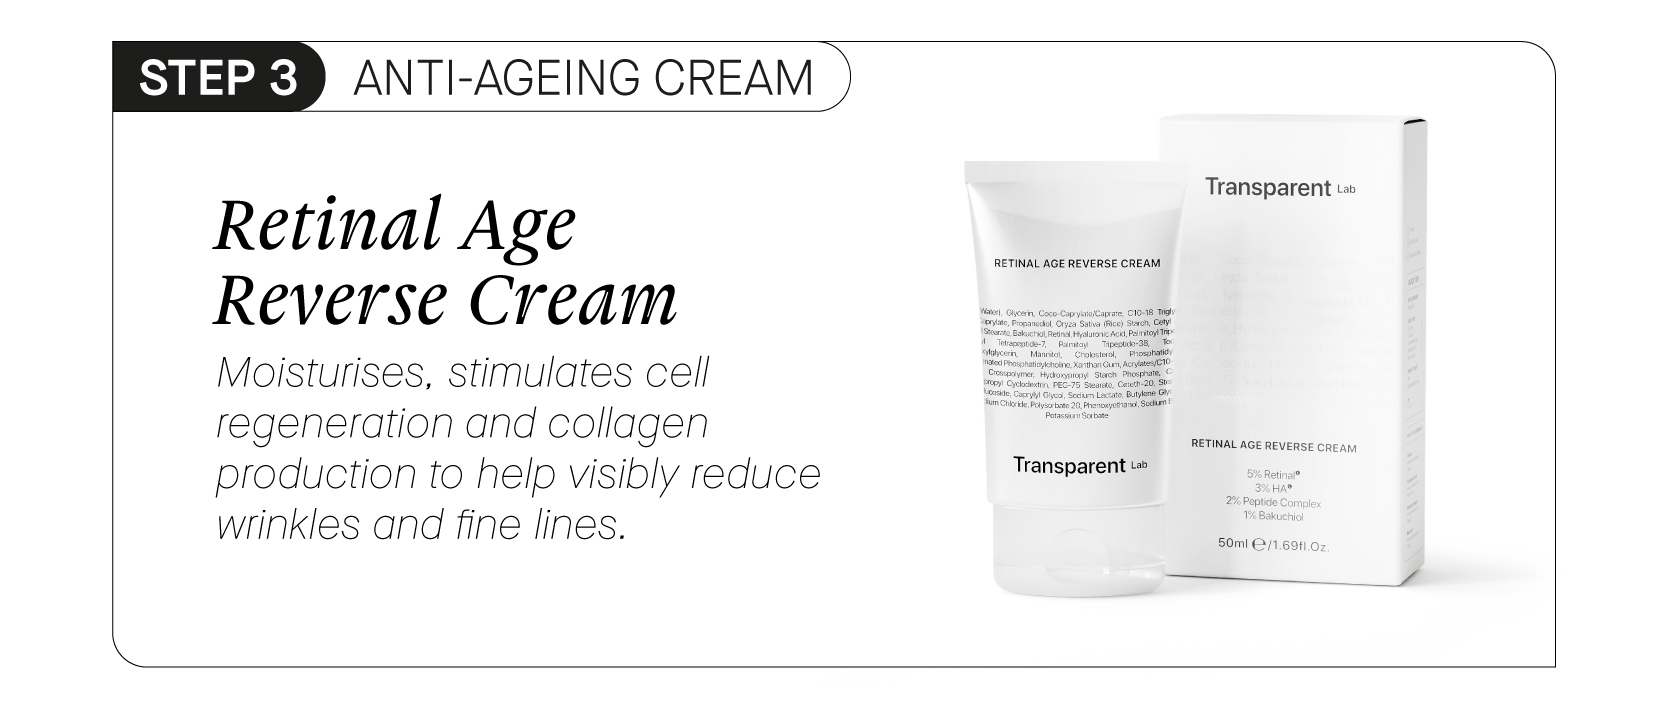  S ANTI-AGEING CREAII Retinal Age Reverse Cream Moisturises, stimulates cell regeneration and collagen production to help visibly reduce wrinkles and fine lines. Transparent t Transparent u 